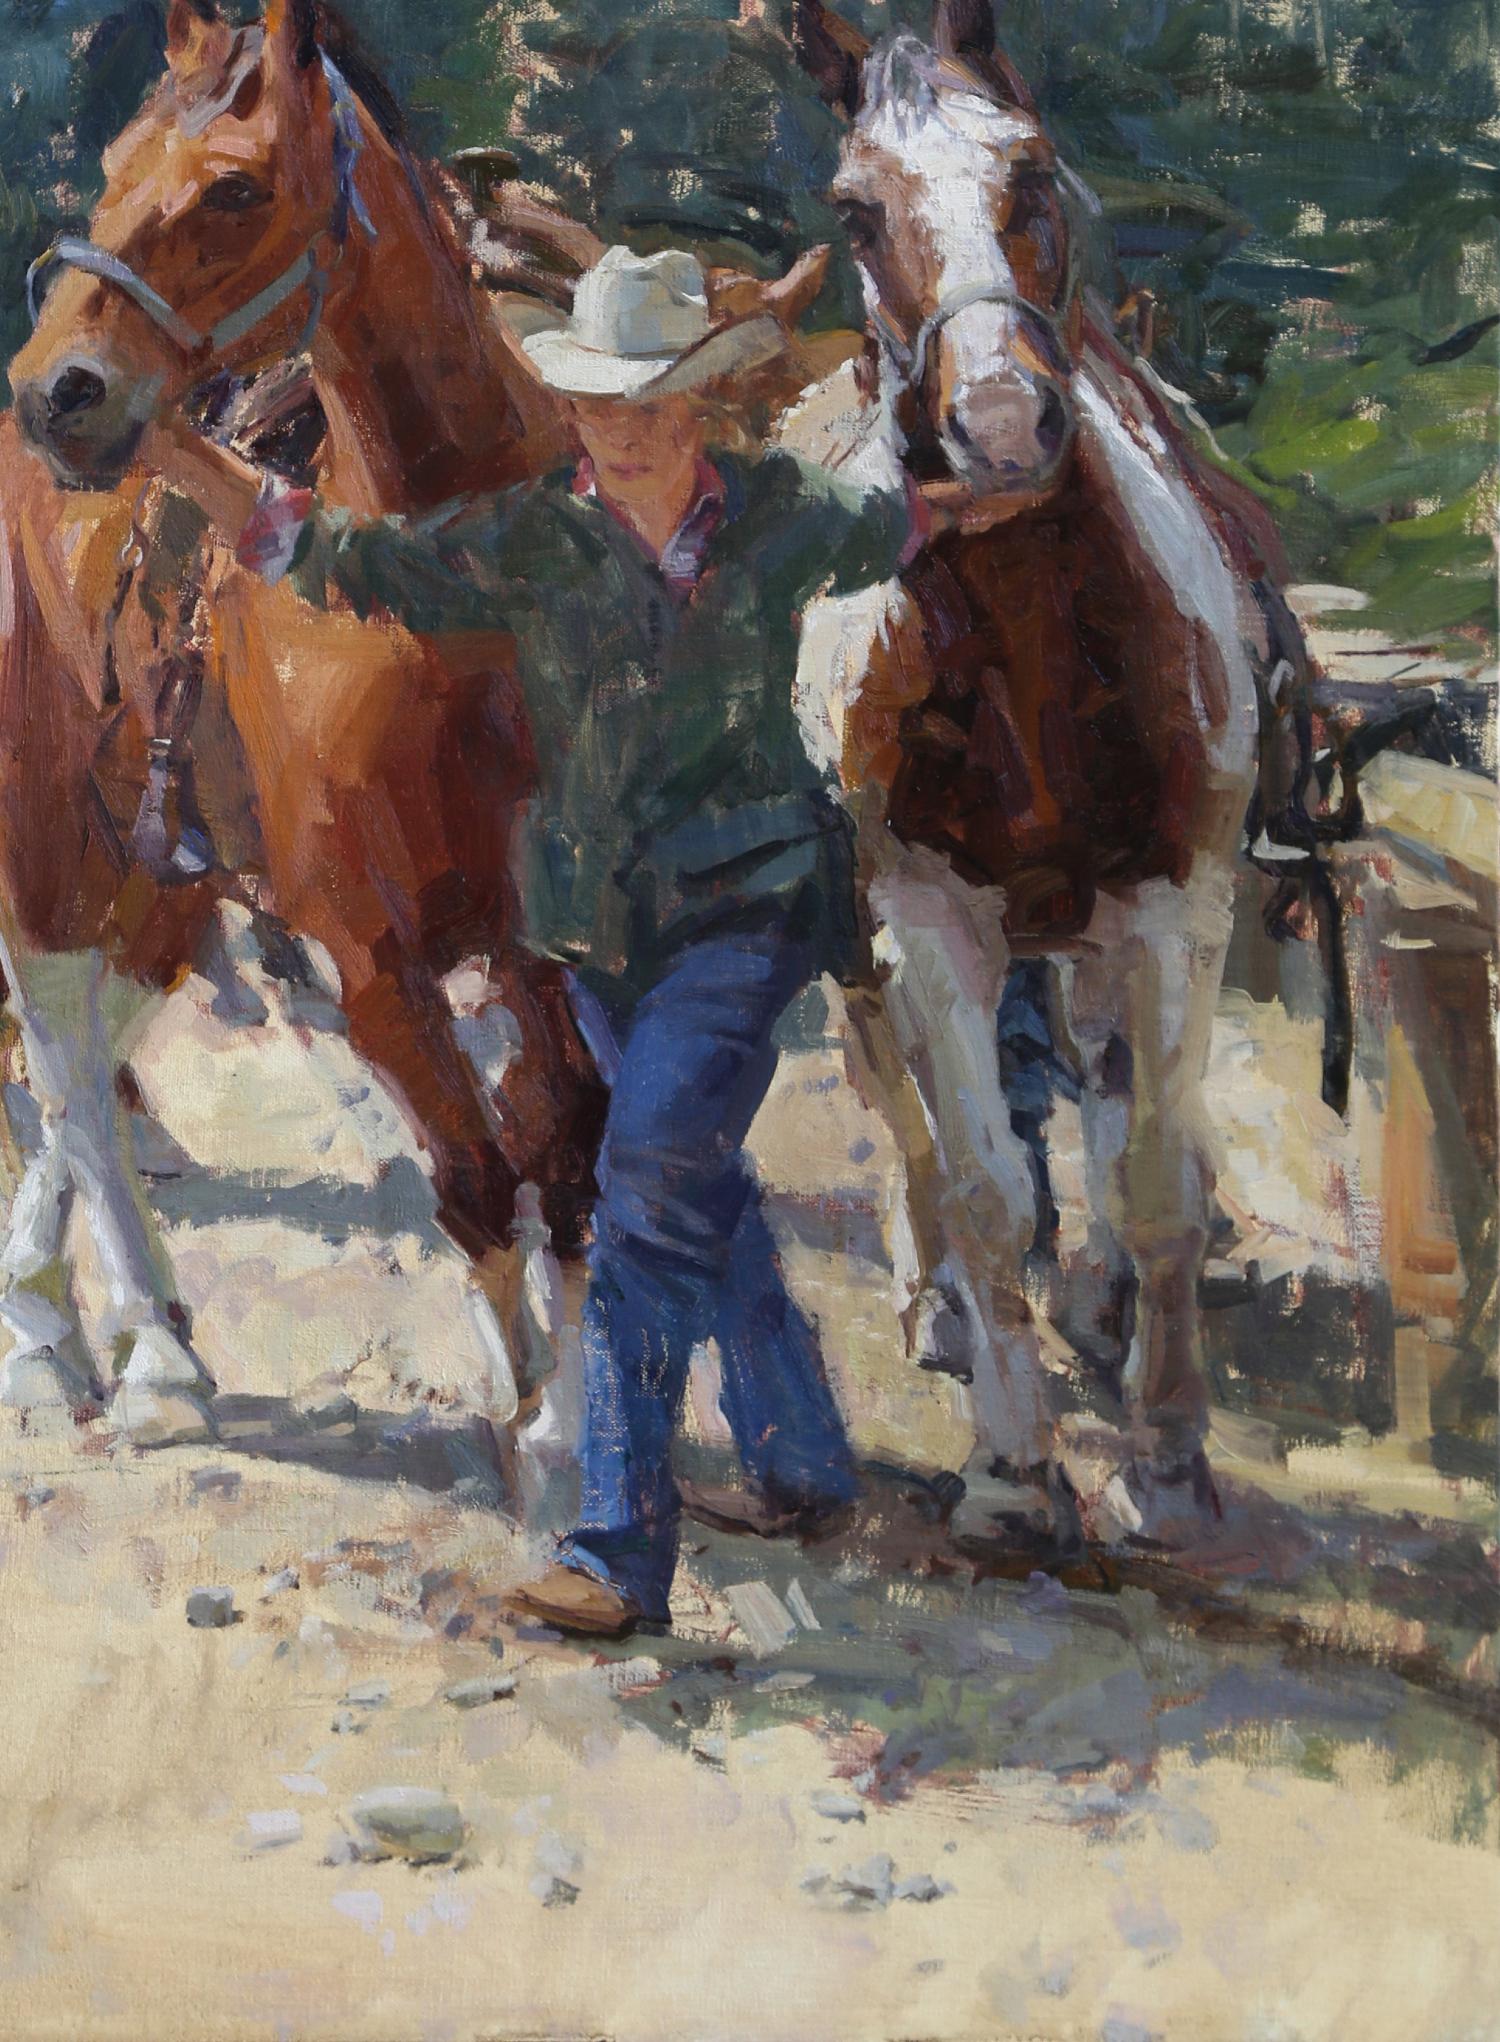 Lead Wrangler, Oil on Linen, American Impressionistic Style, Western, Southwest - Painting by Raj Chaudhuri